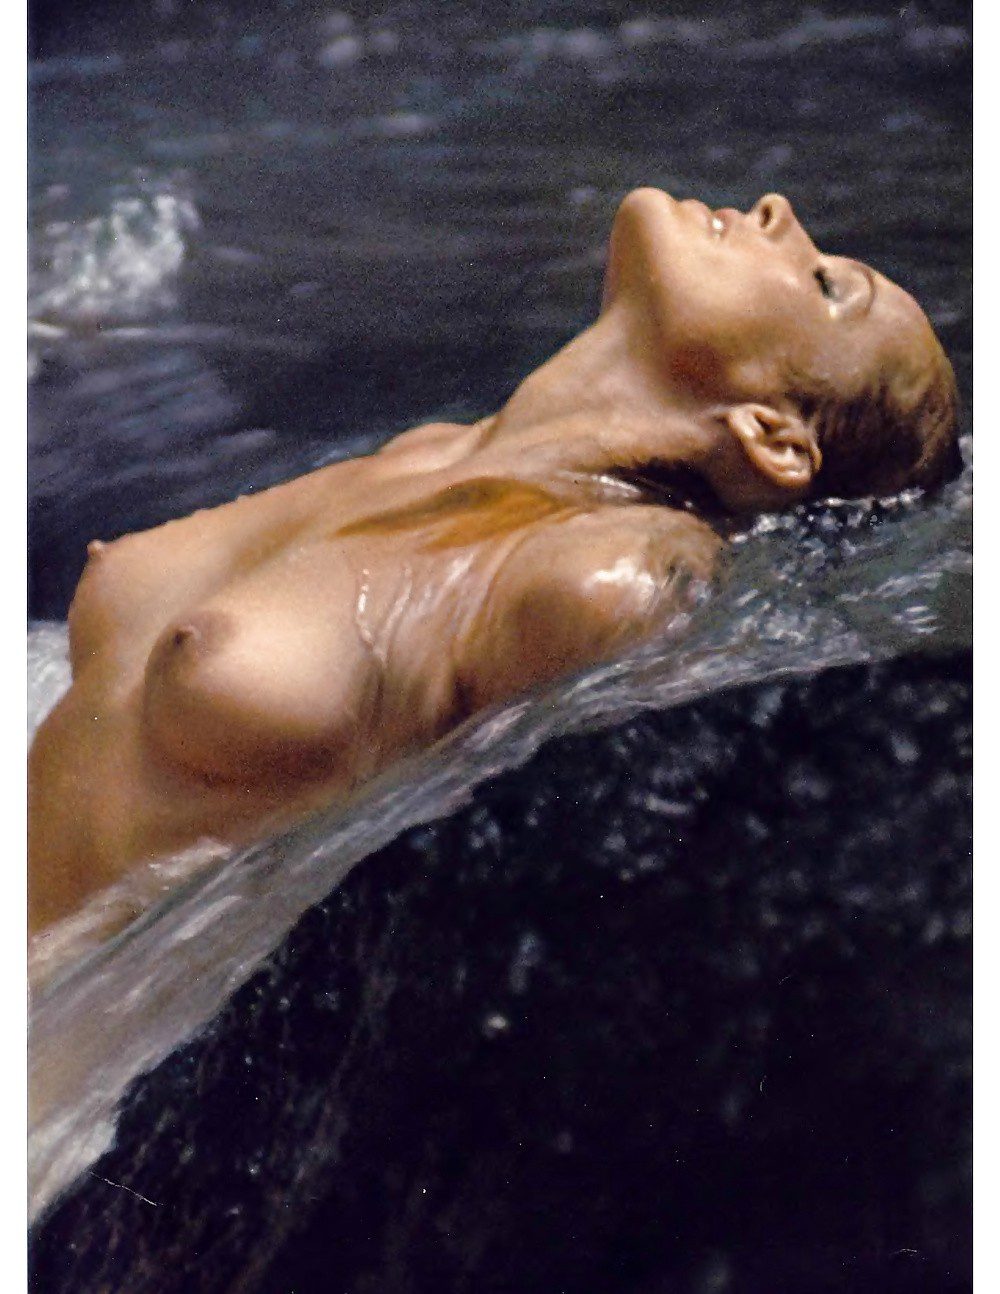 Ursula Andress letting the water run over her